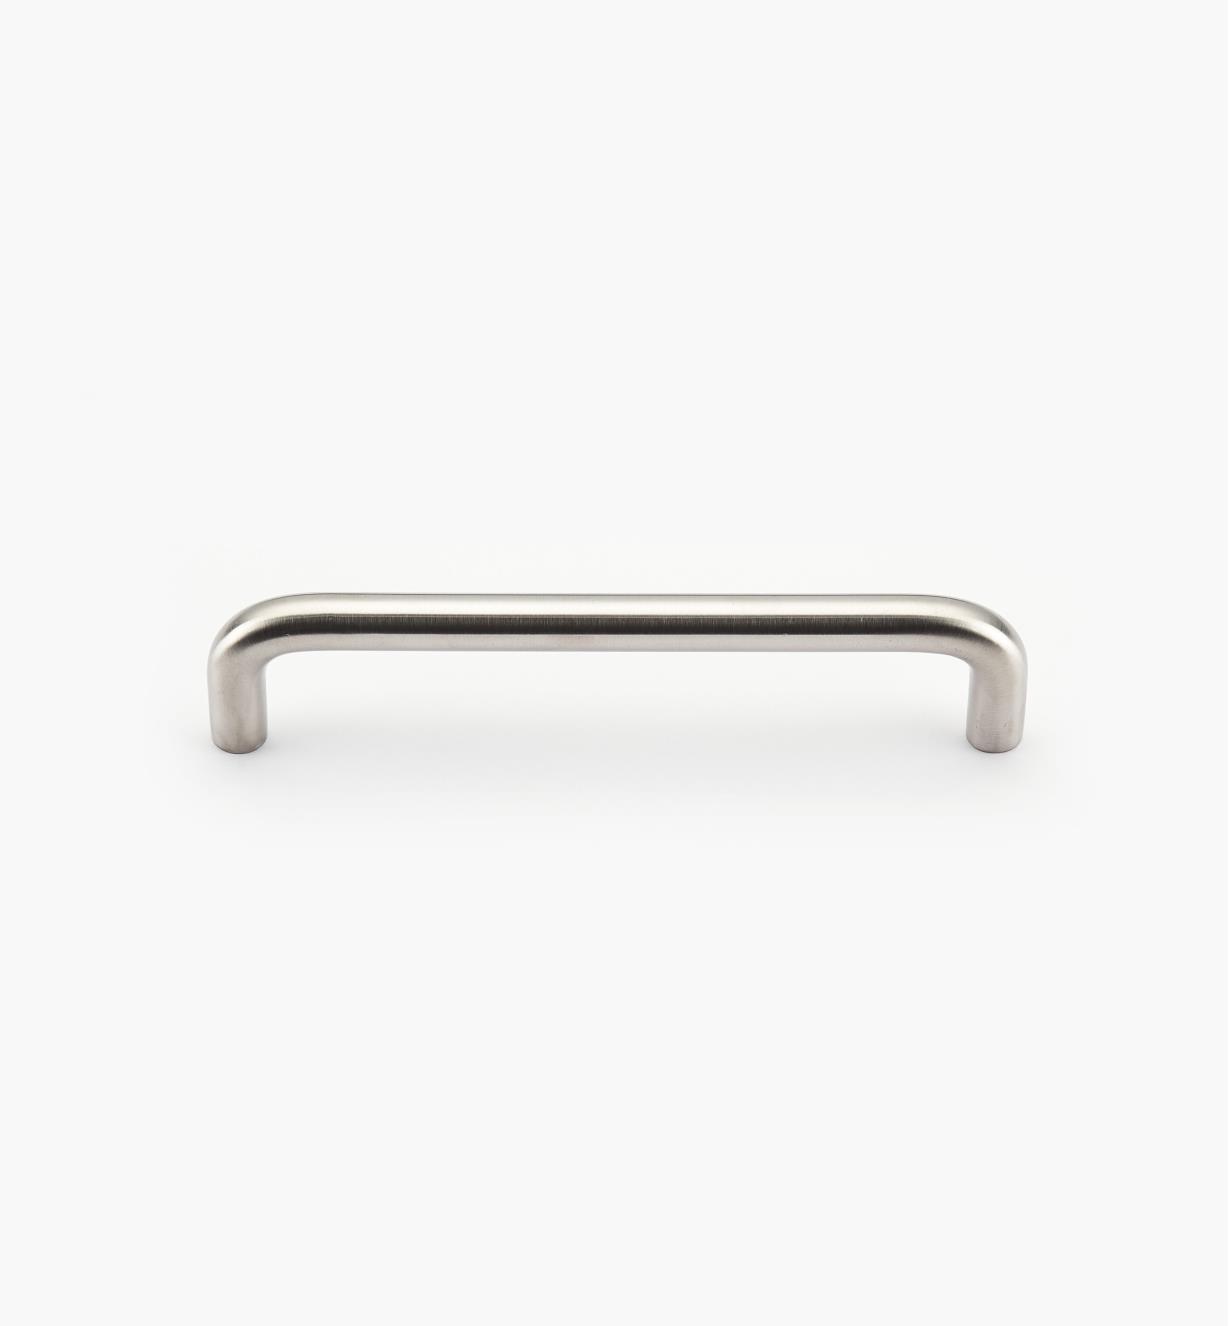 01W6856 - 10mm x 128mm Stainless-Steel Wire Pull